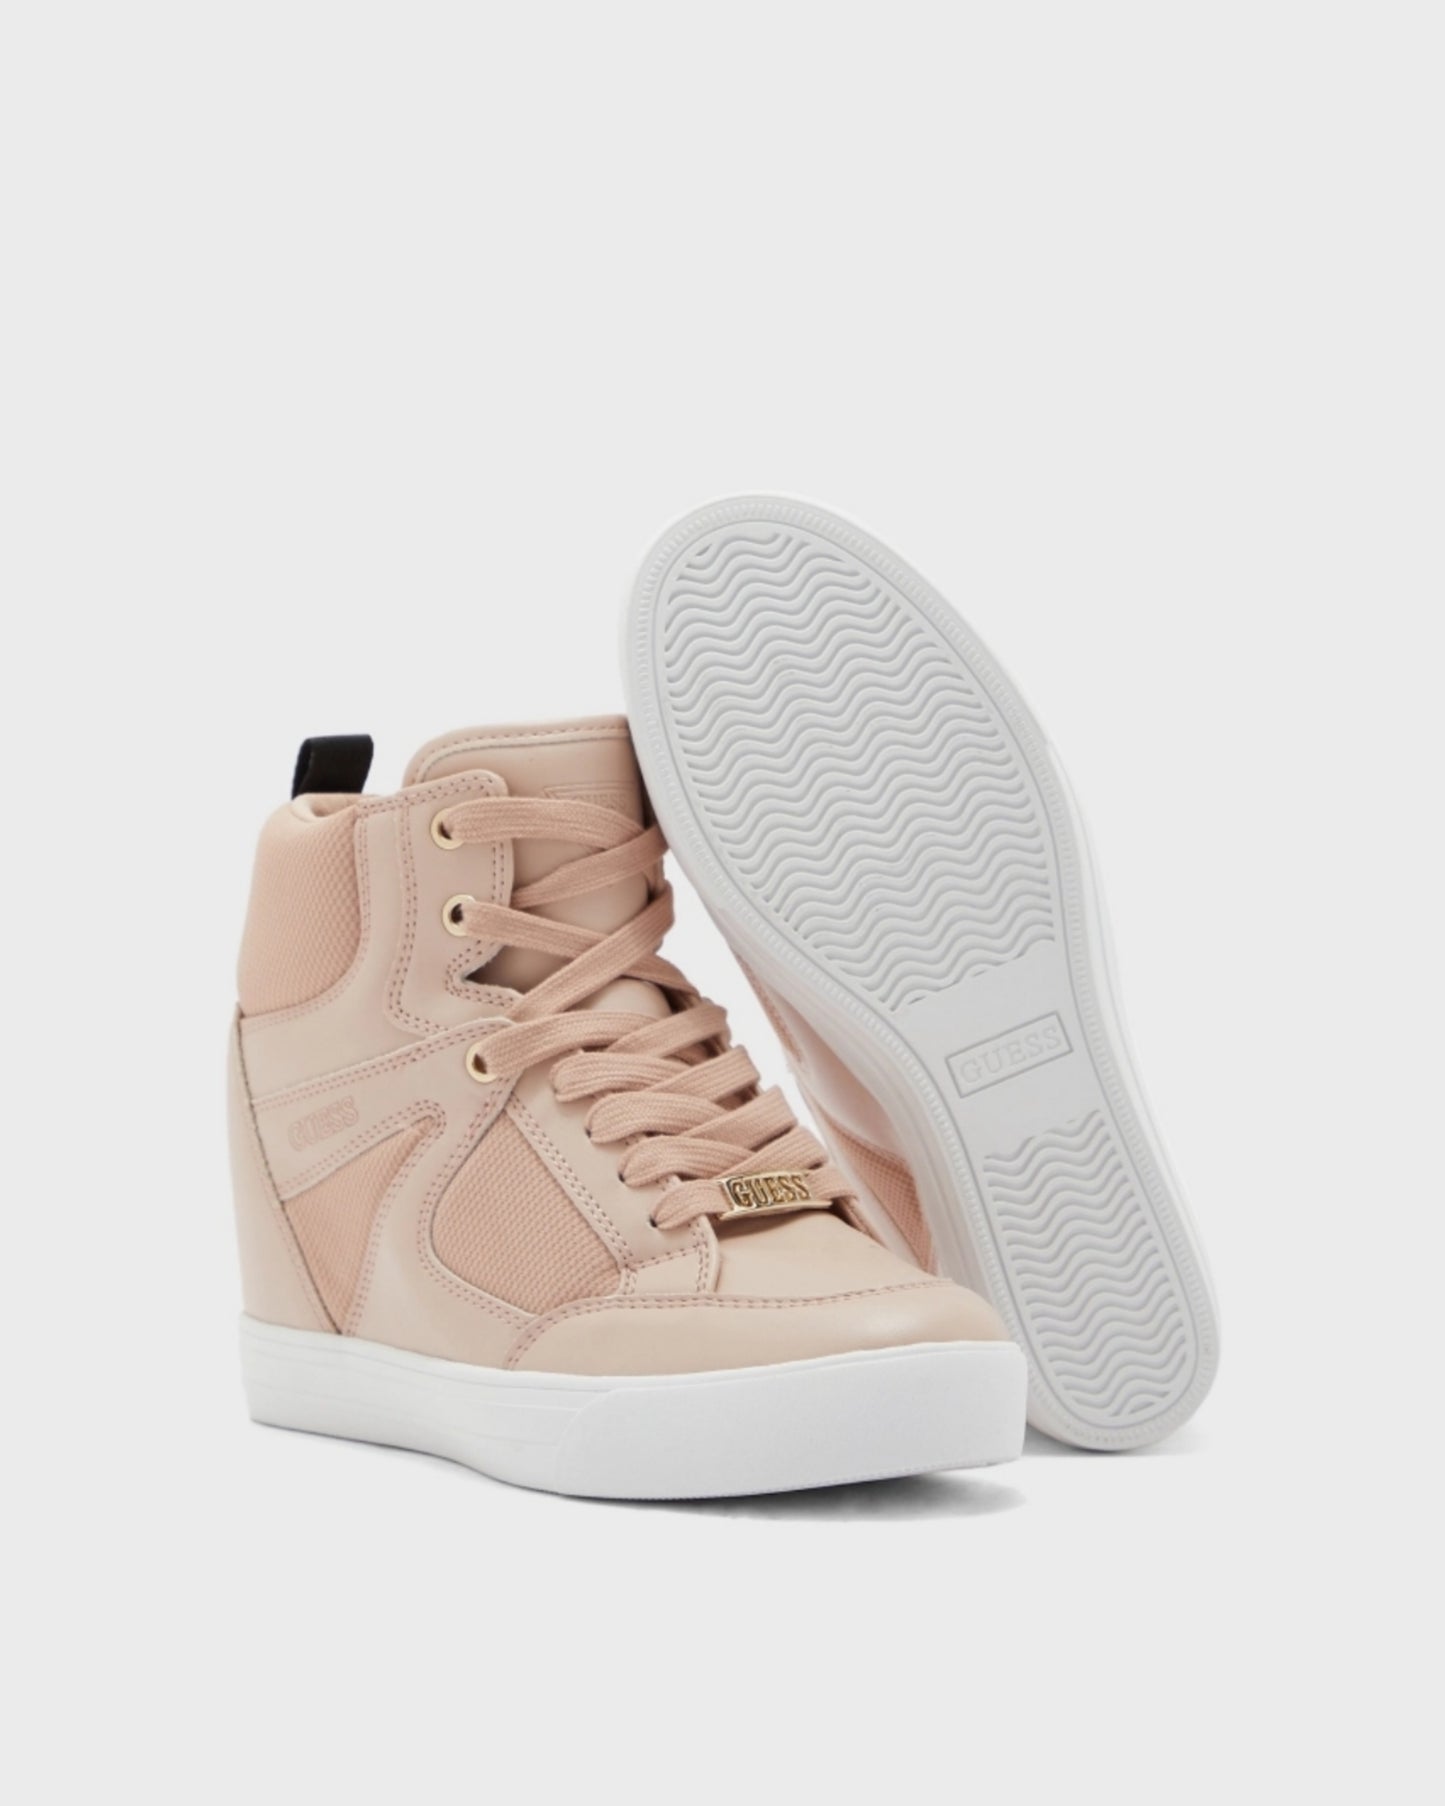 Guess Pink High Top Sneakers